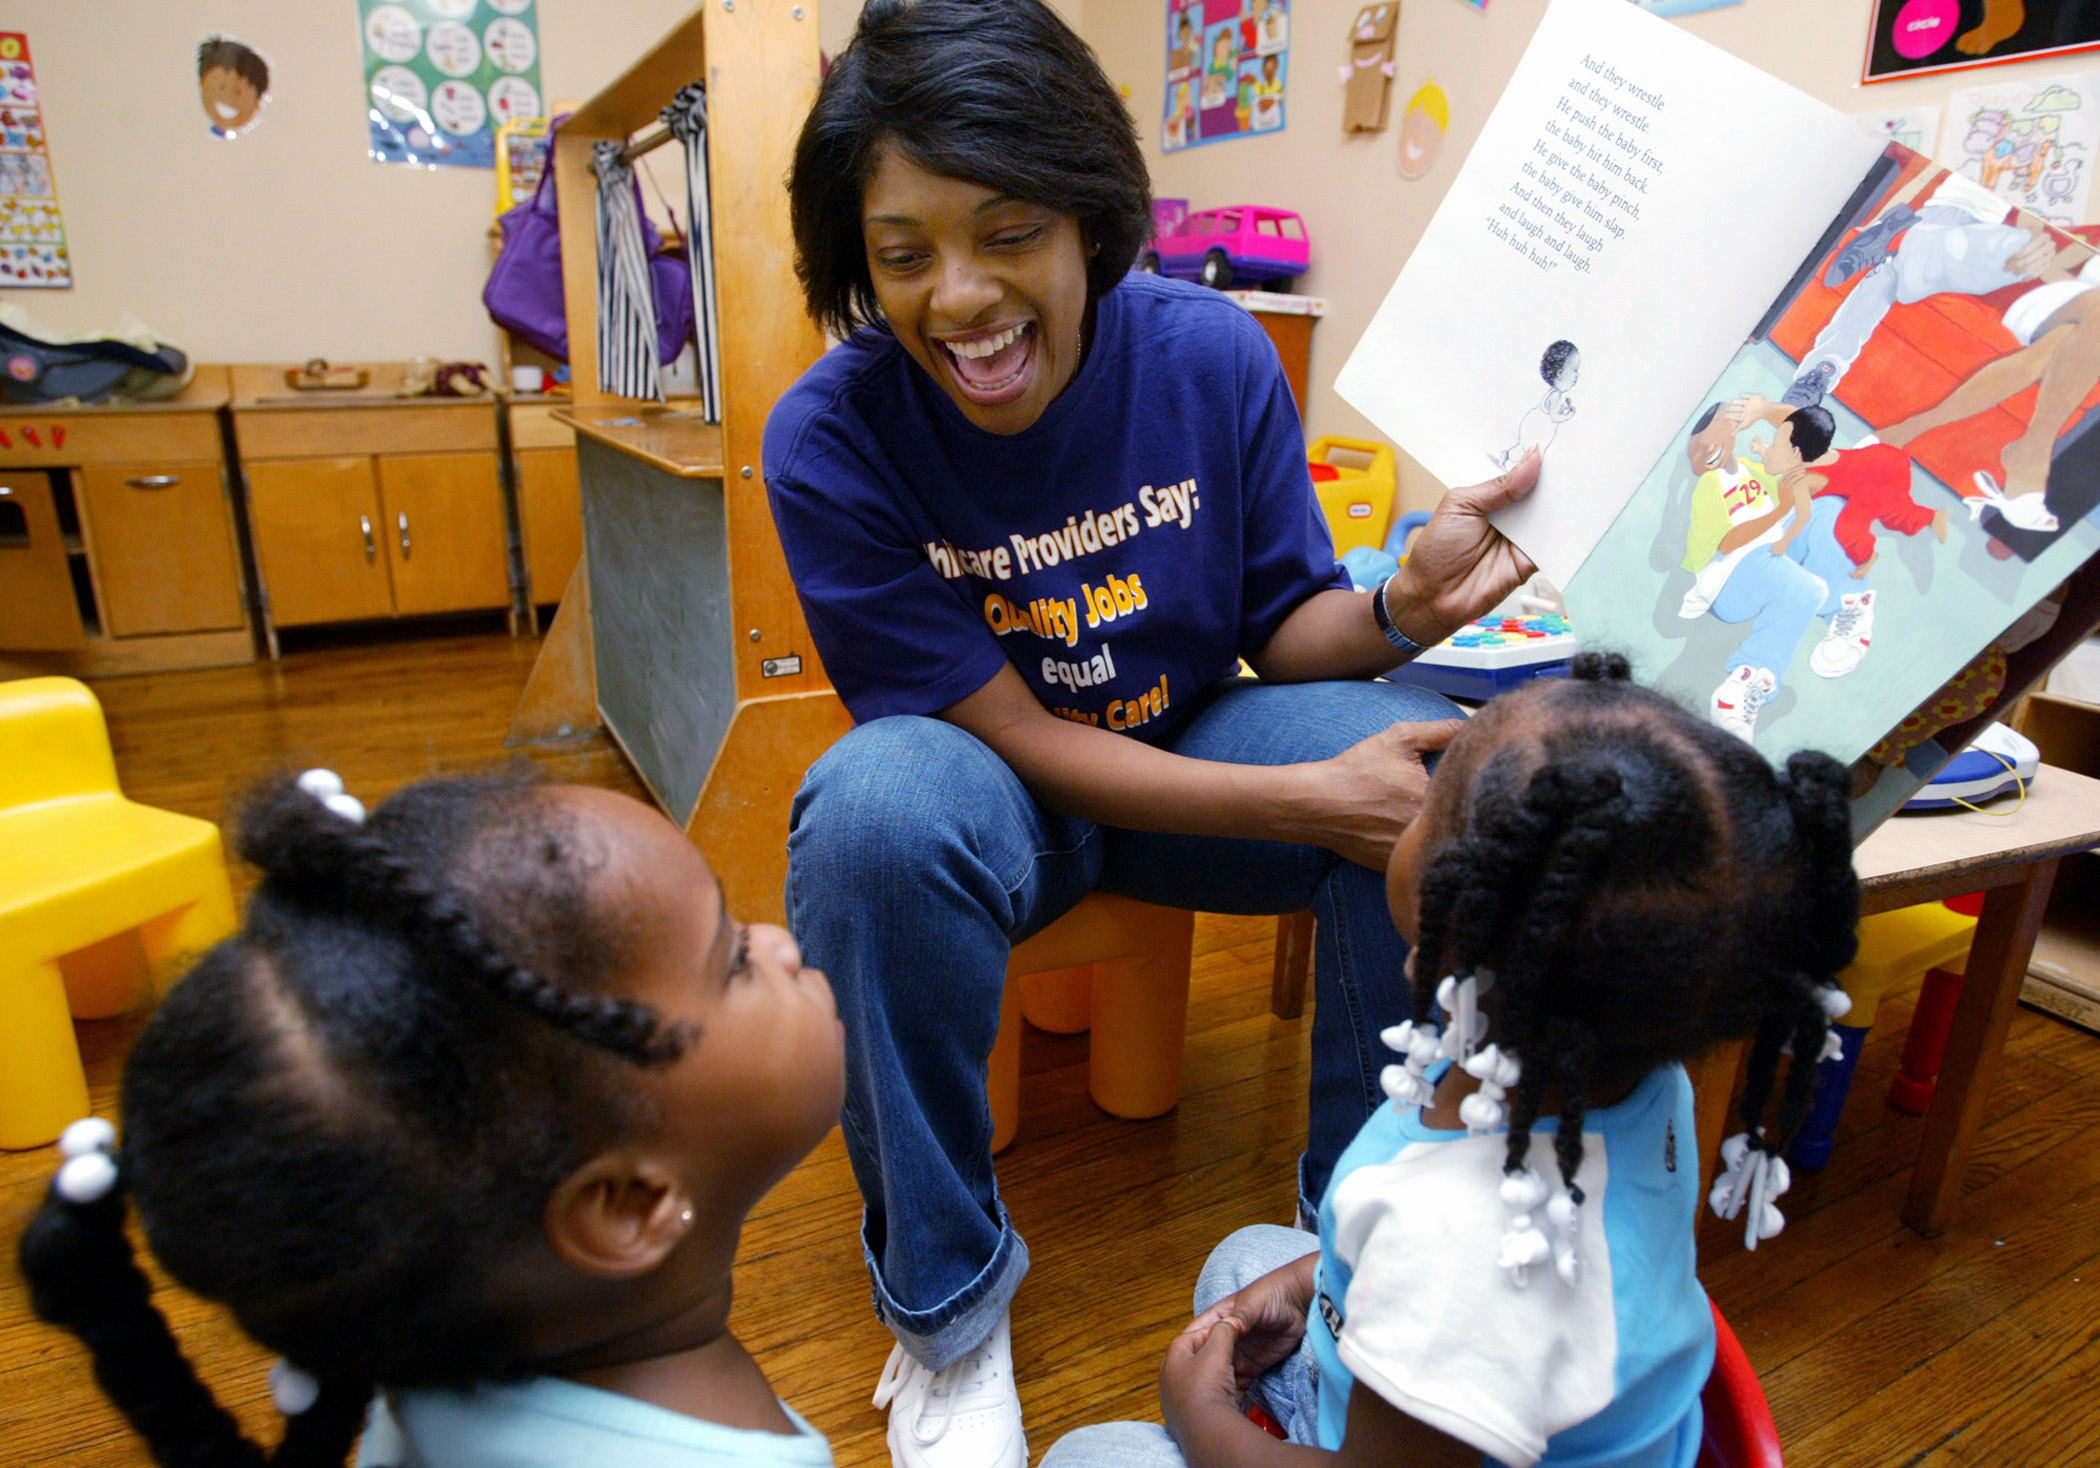 Child care worker reading a book